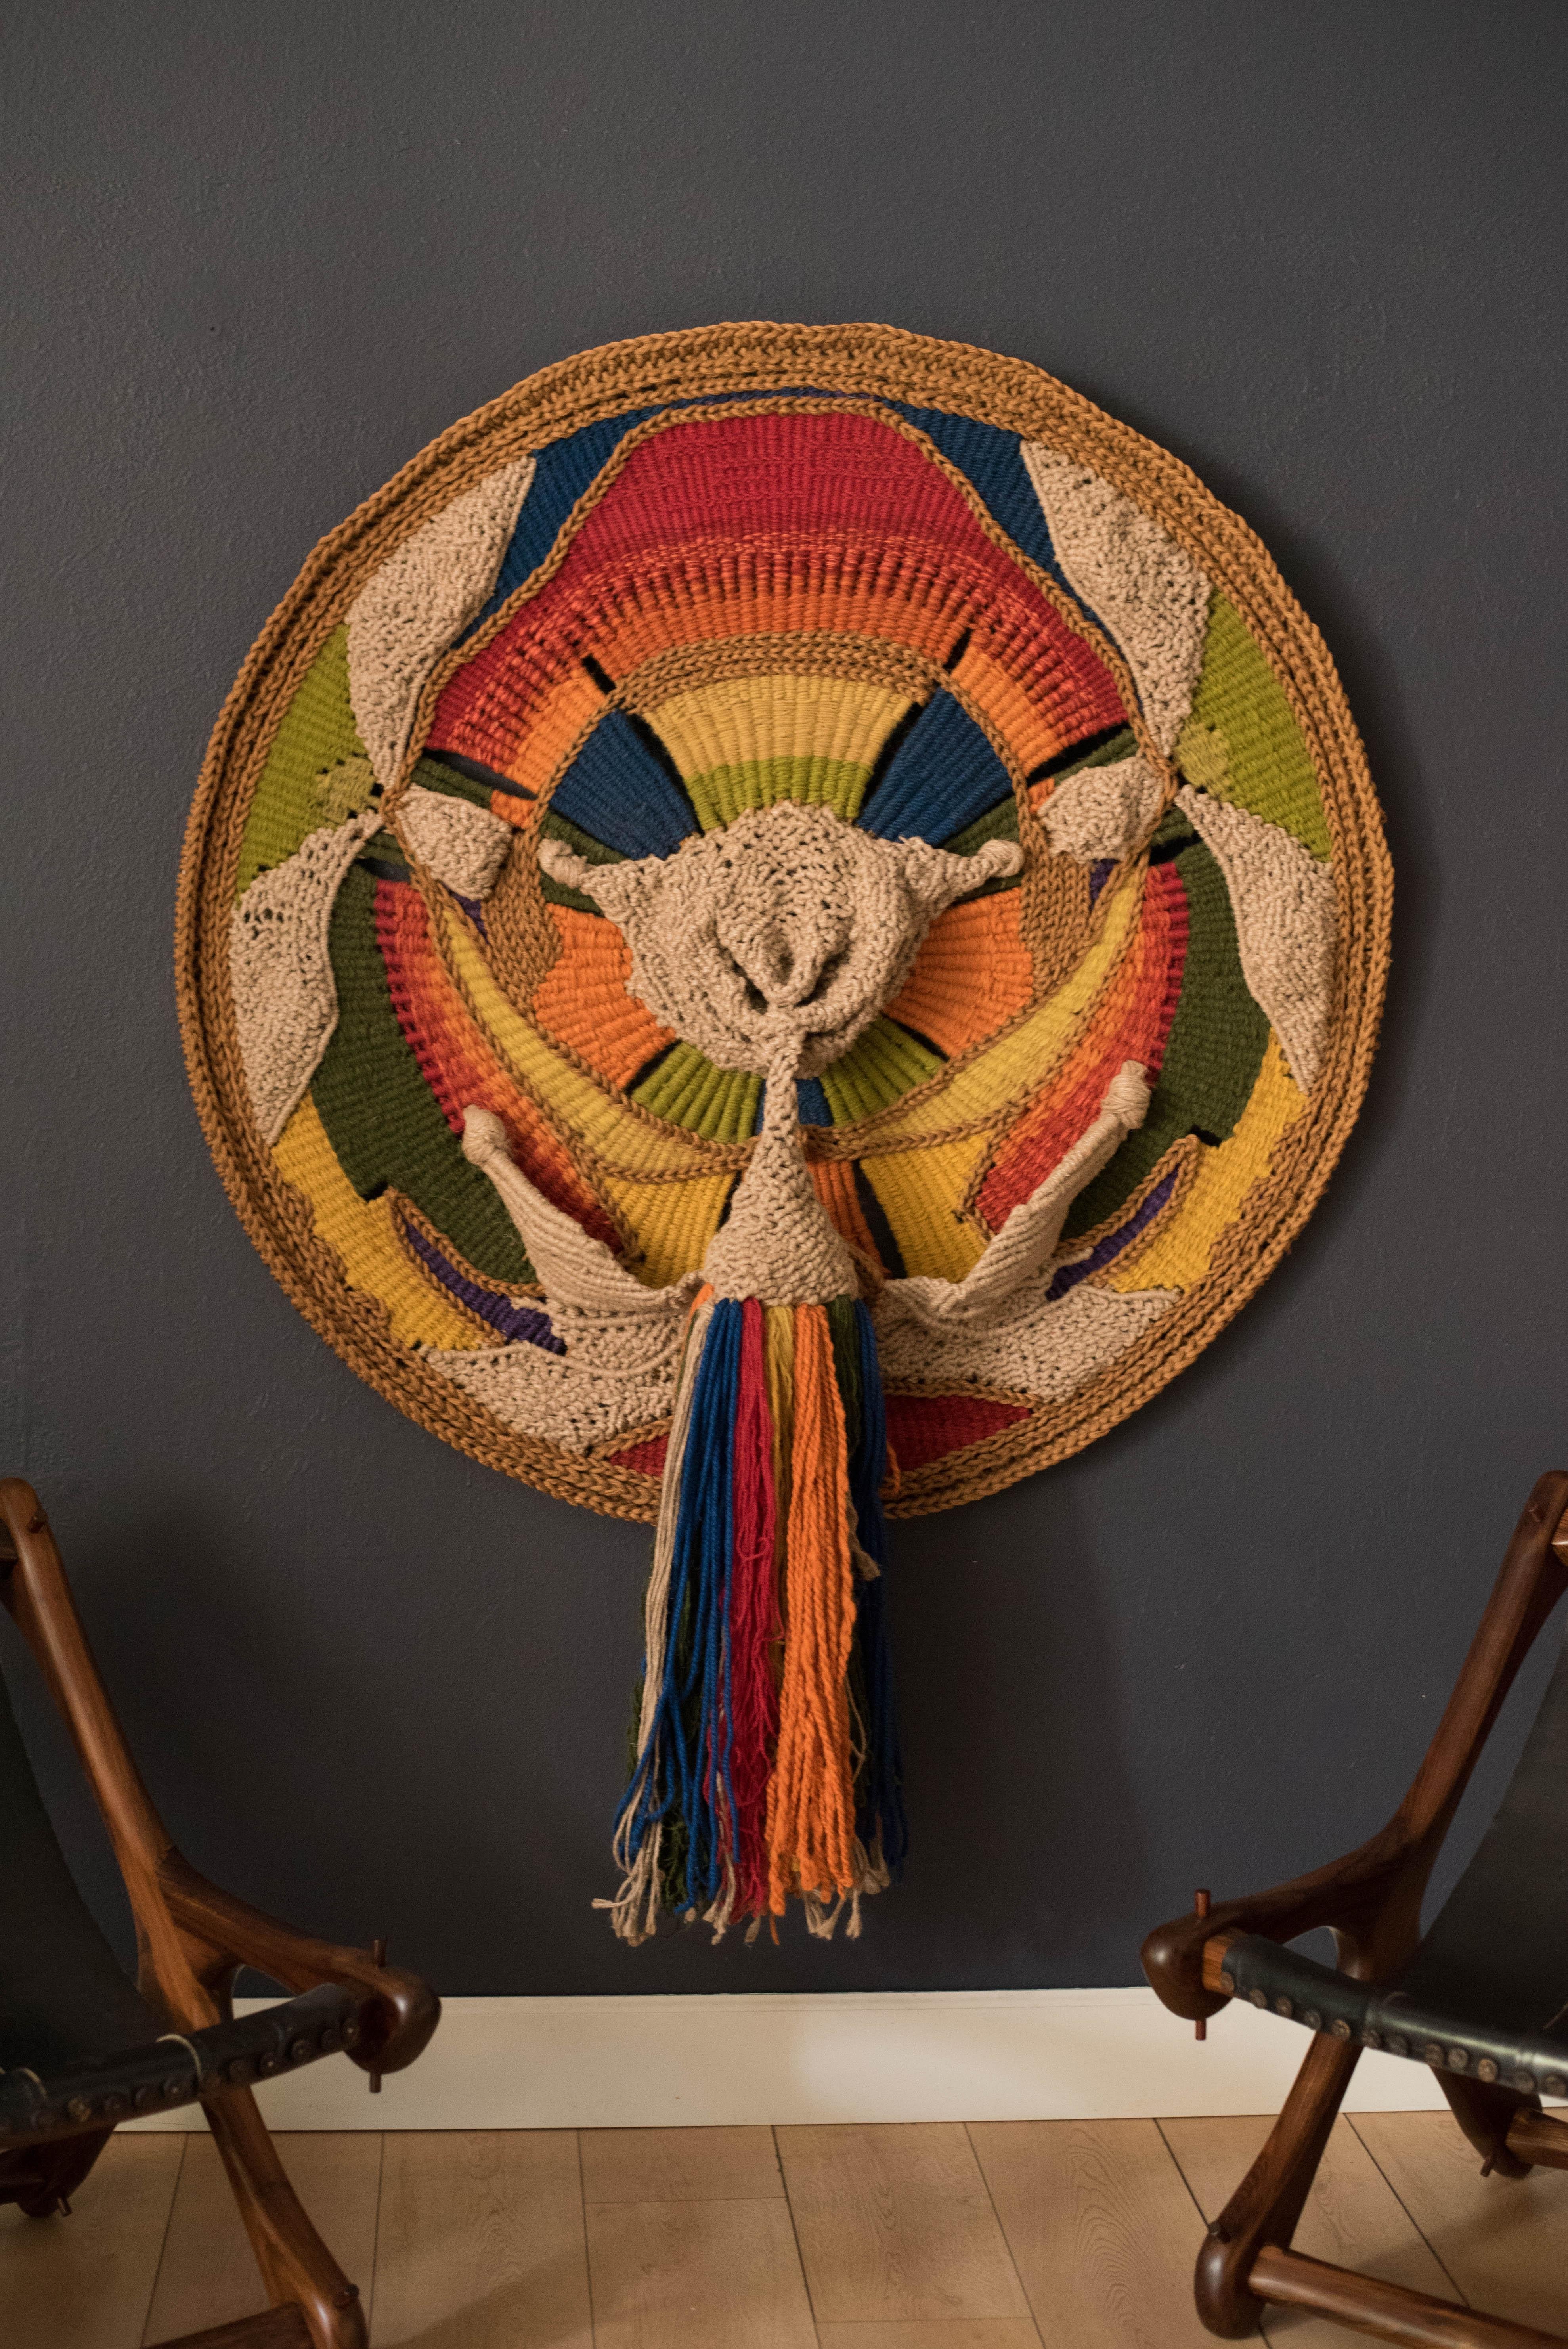 Vibrant colorful wall hanging fiber art tapestry made by California artist Marion Ferri, circa 1970s. This oversized piece features intricate hand woven natural and dyed fibers. Adds a soft texture and a pop of lively colors to any space. 

Includes